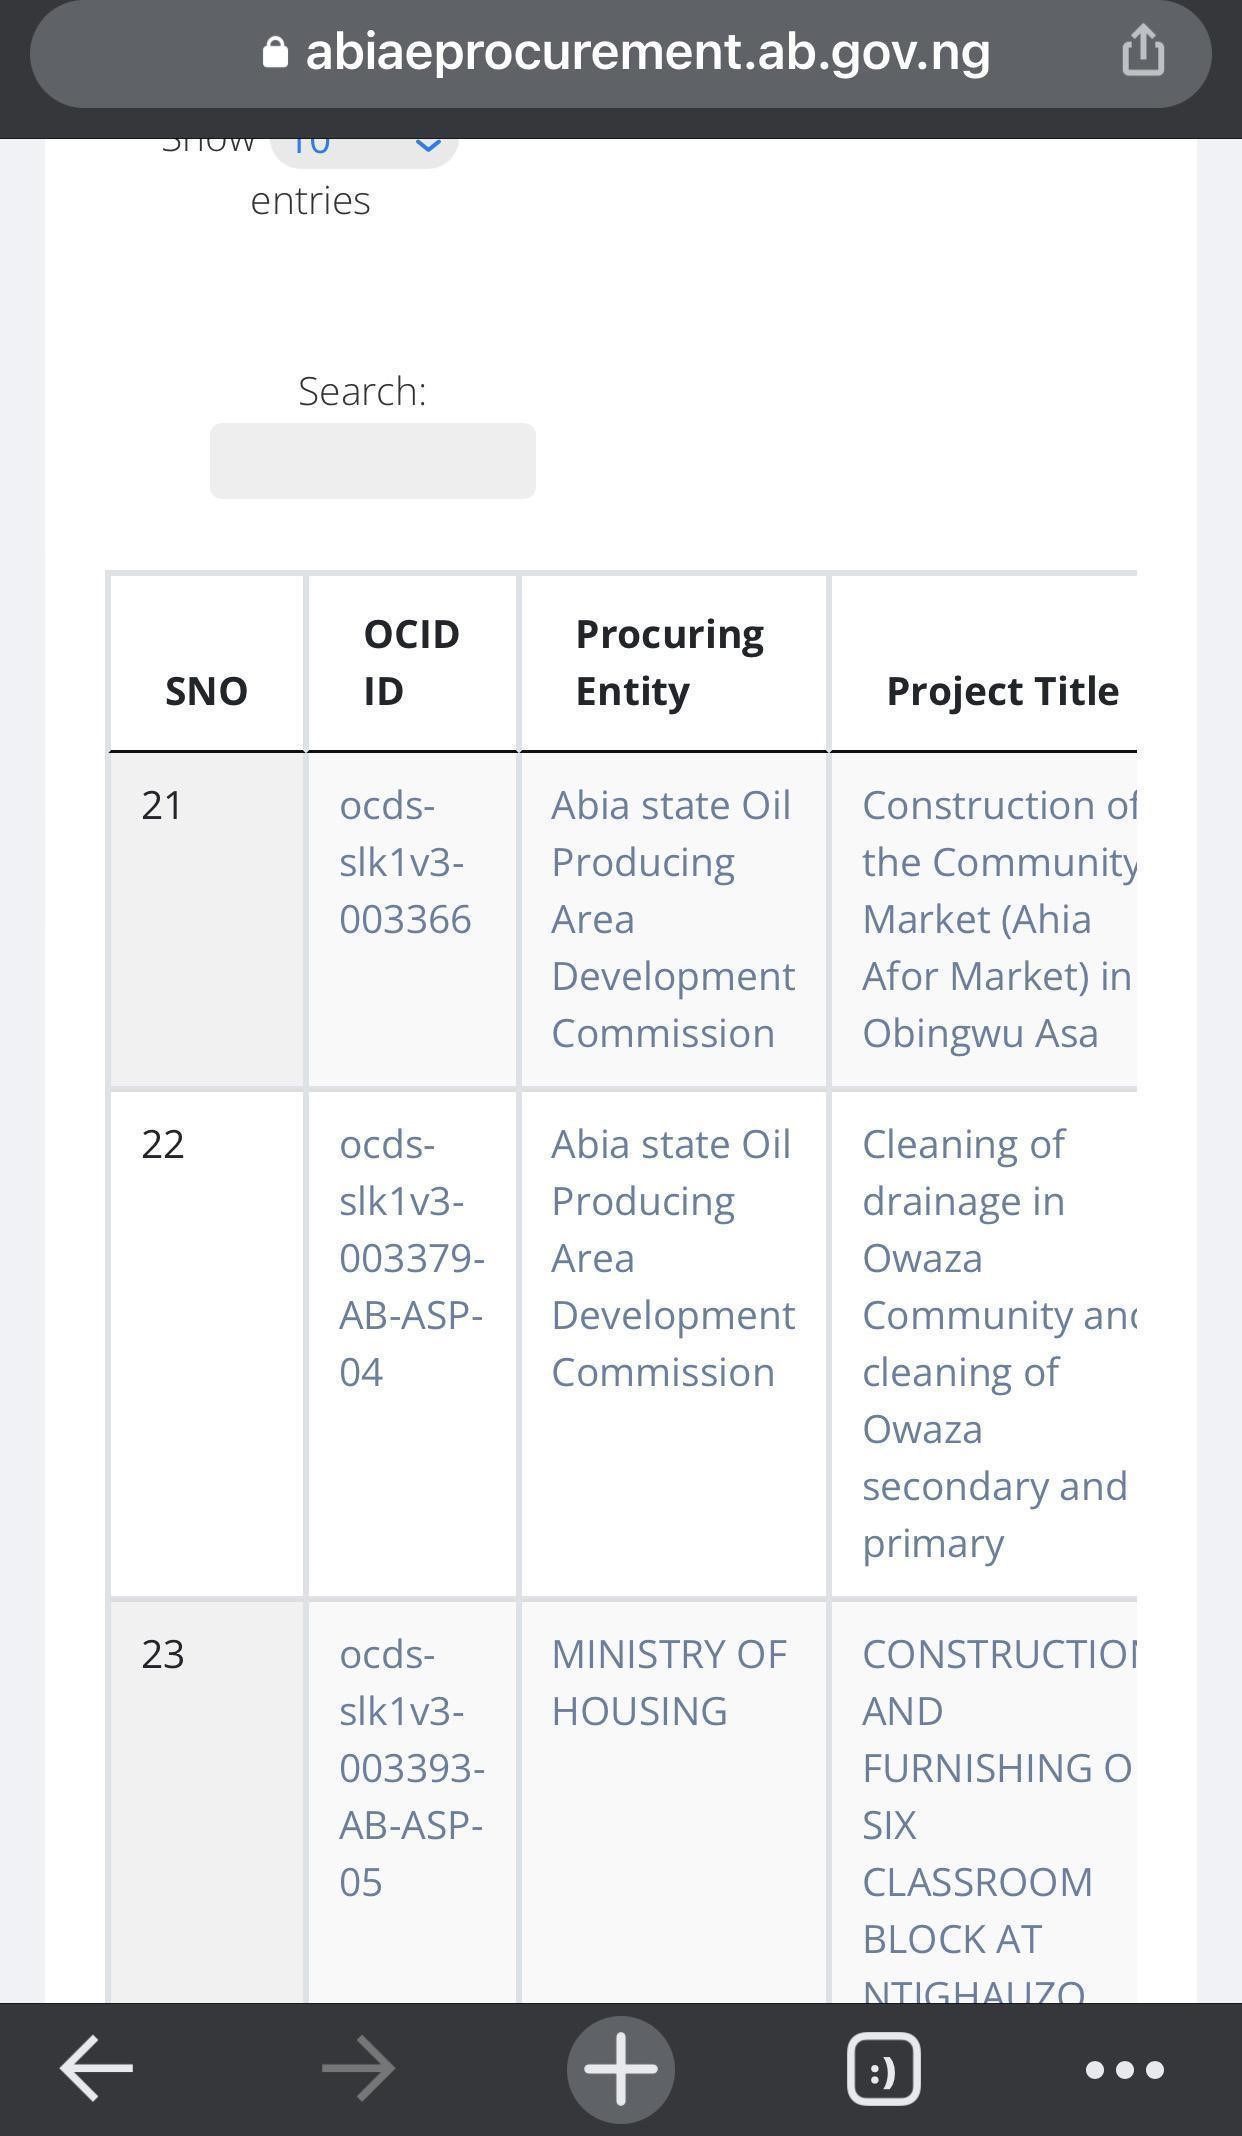  The Abia state e-procurement portal that uploaded partial details on the awarded contracts